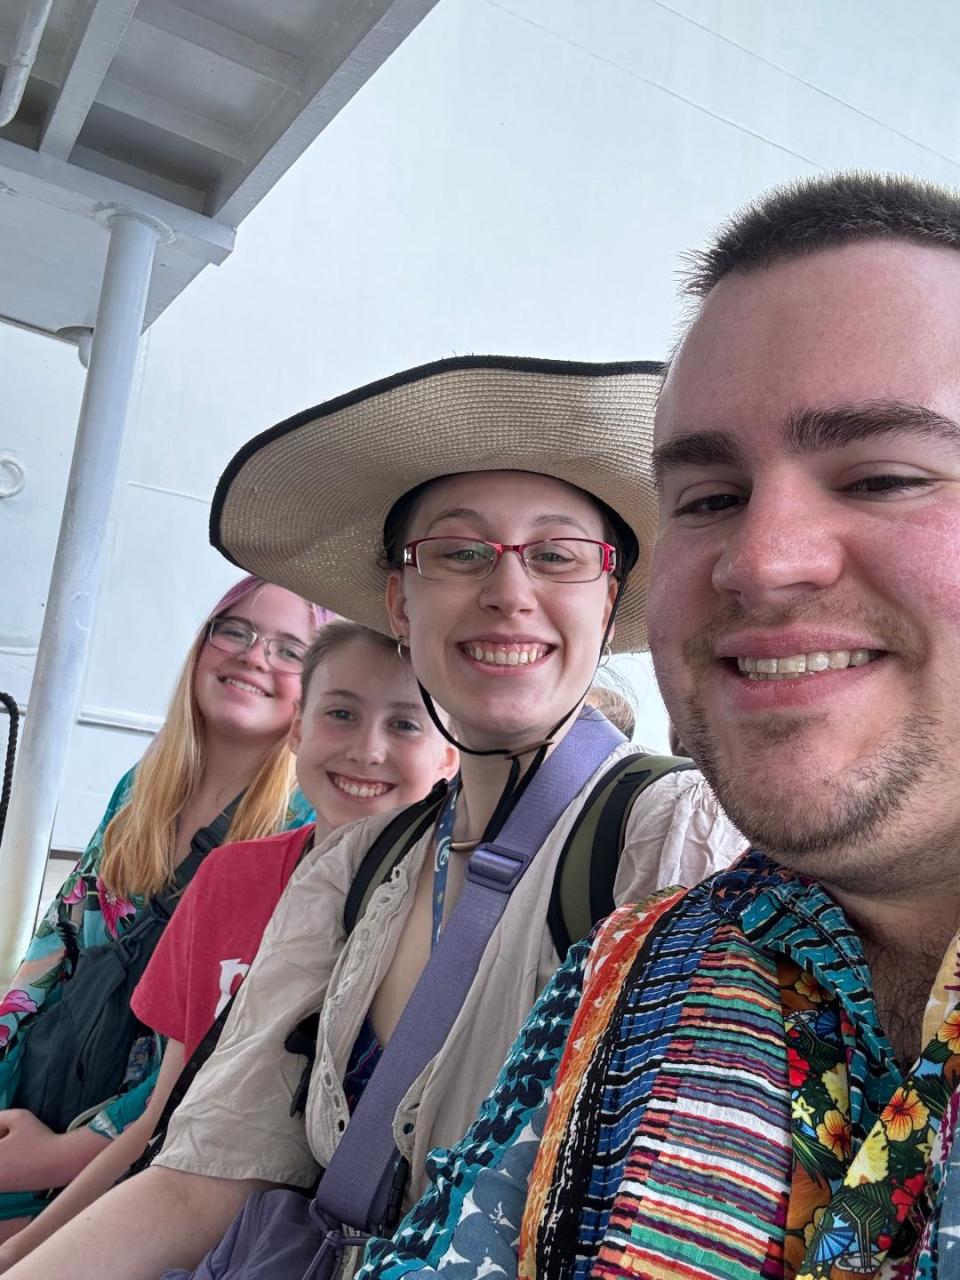 The Bridges family of Templeton during their Caribbean cruise that ended with a helicopter rescue due to a medical emergency. From left, Olyvia, Aiden, Angela, and Charles.